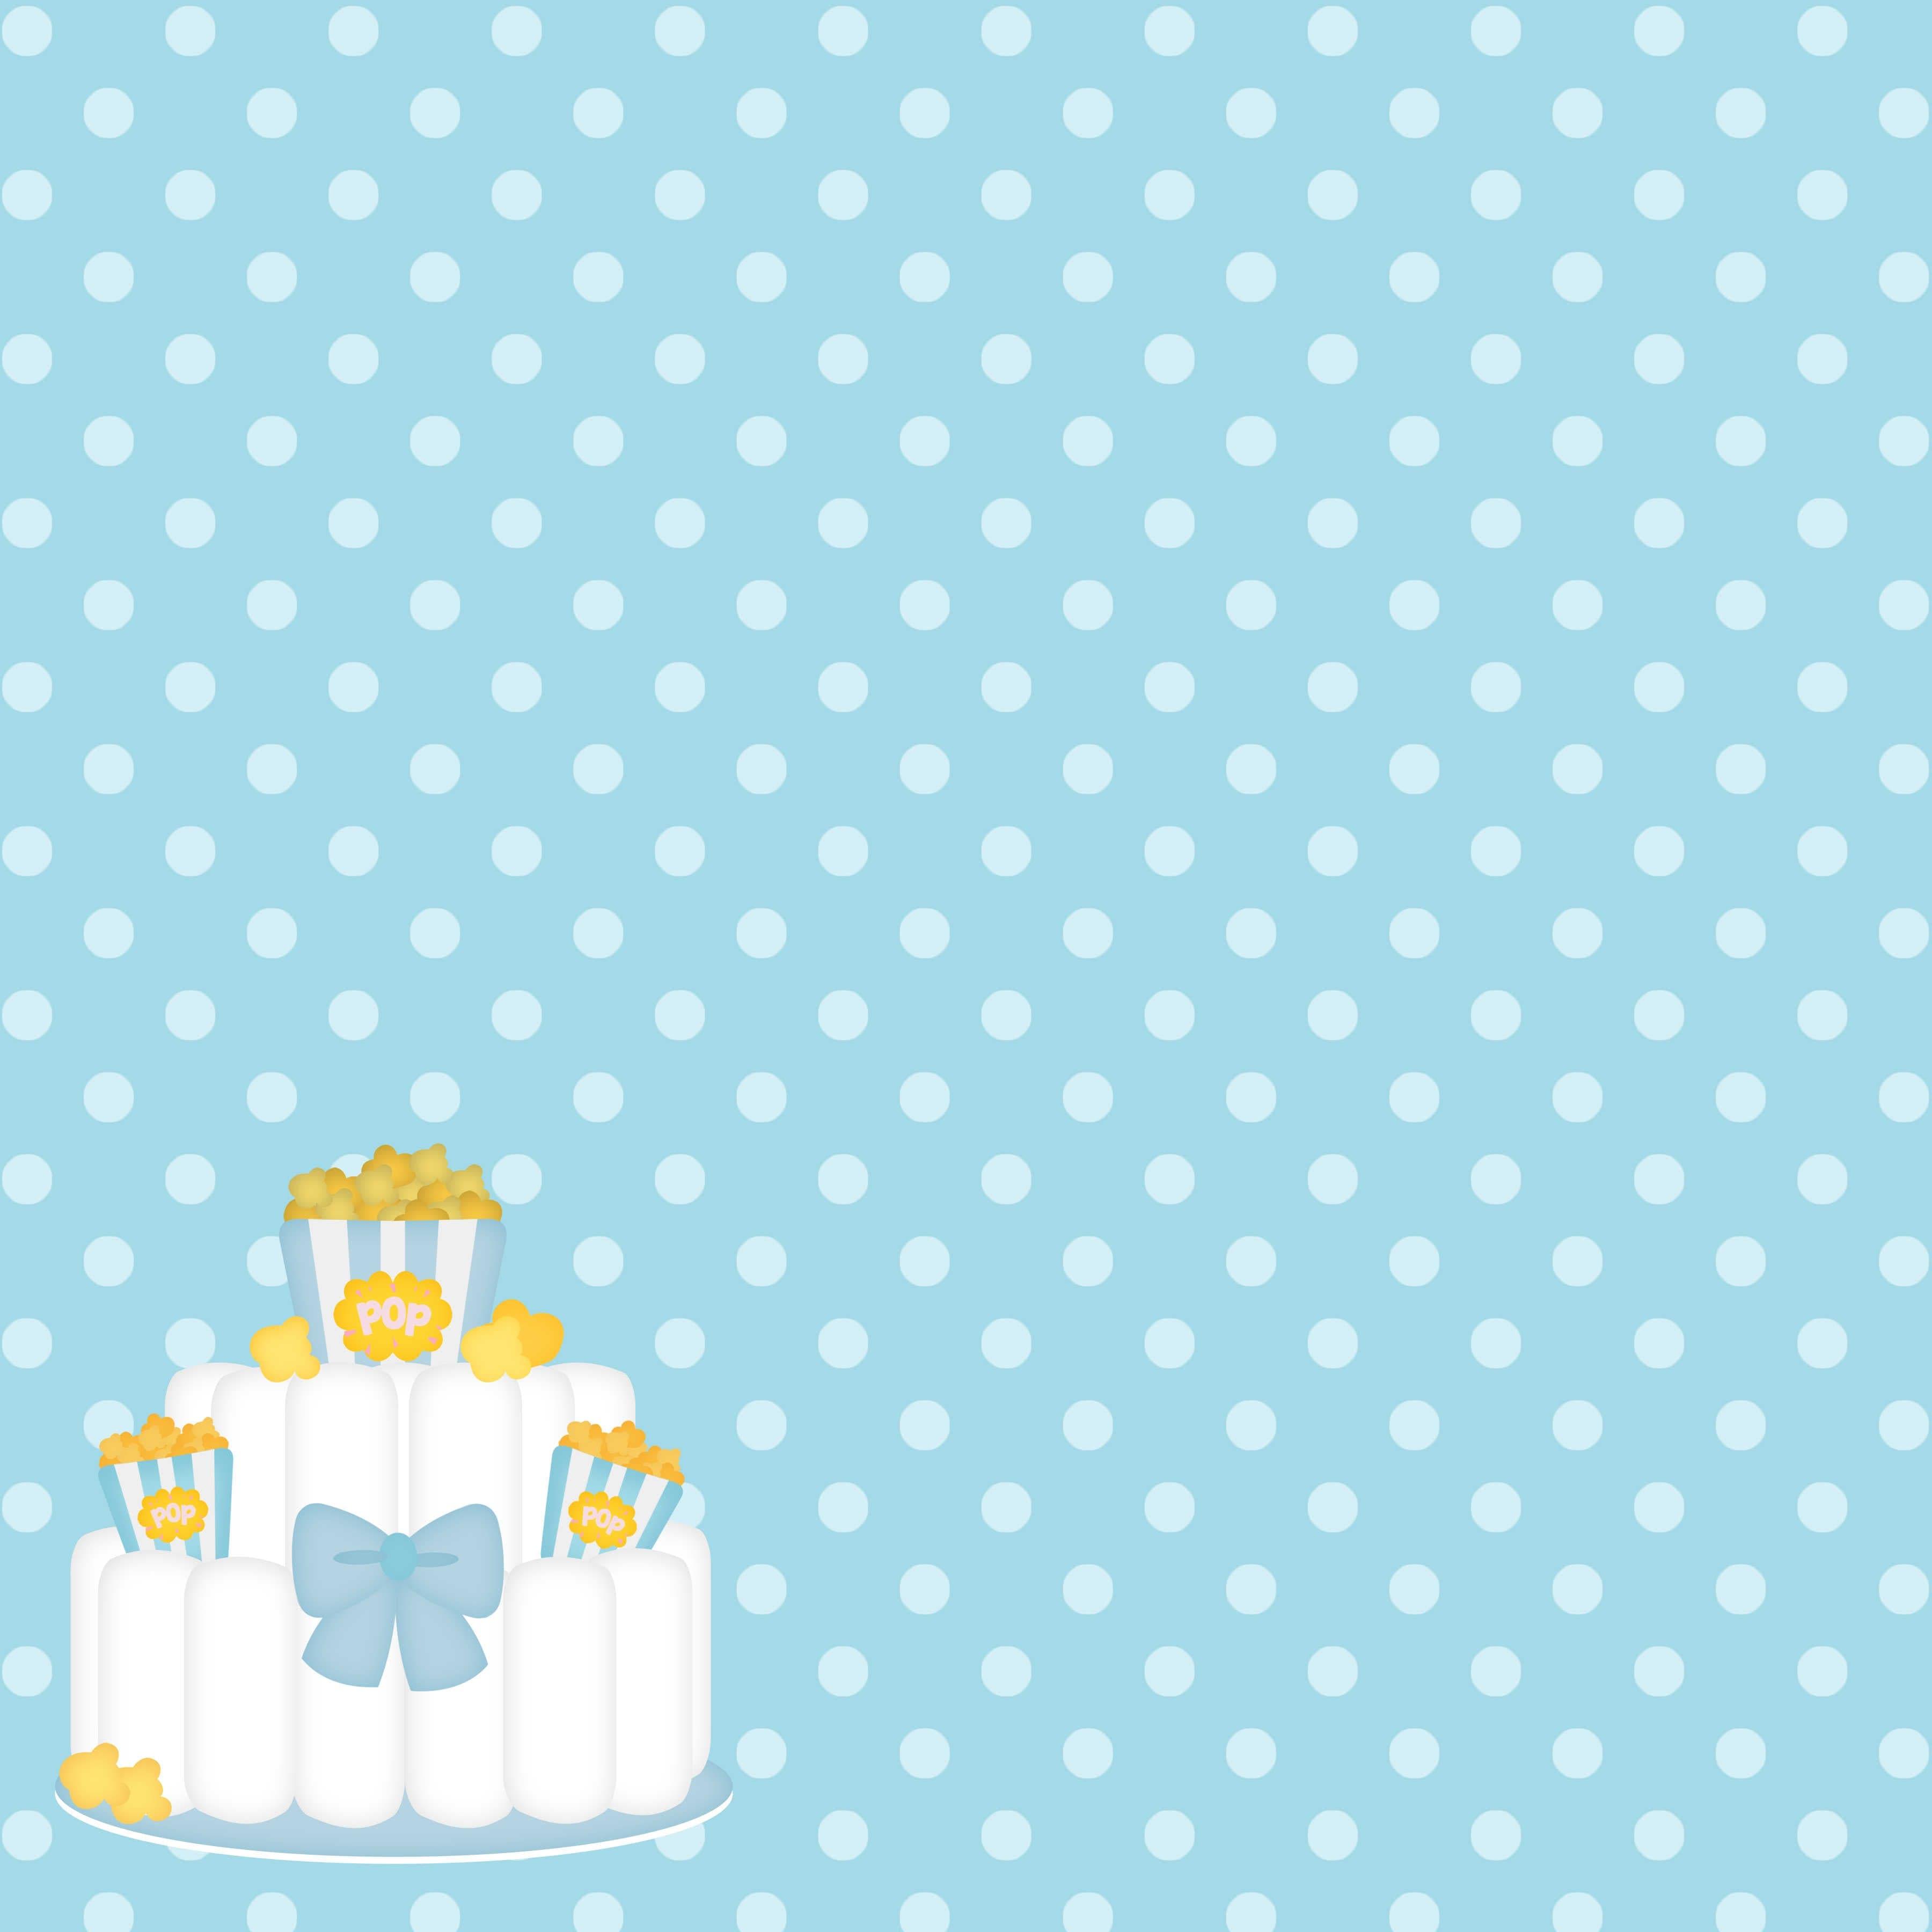 Ready To Pop Collection Diaper Cake 12 x 12 Double-Sided Scrapbook Paper by SSC Designs - Scrapbook Supply Companies